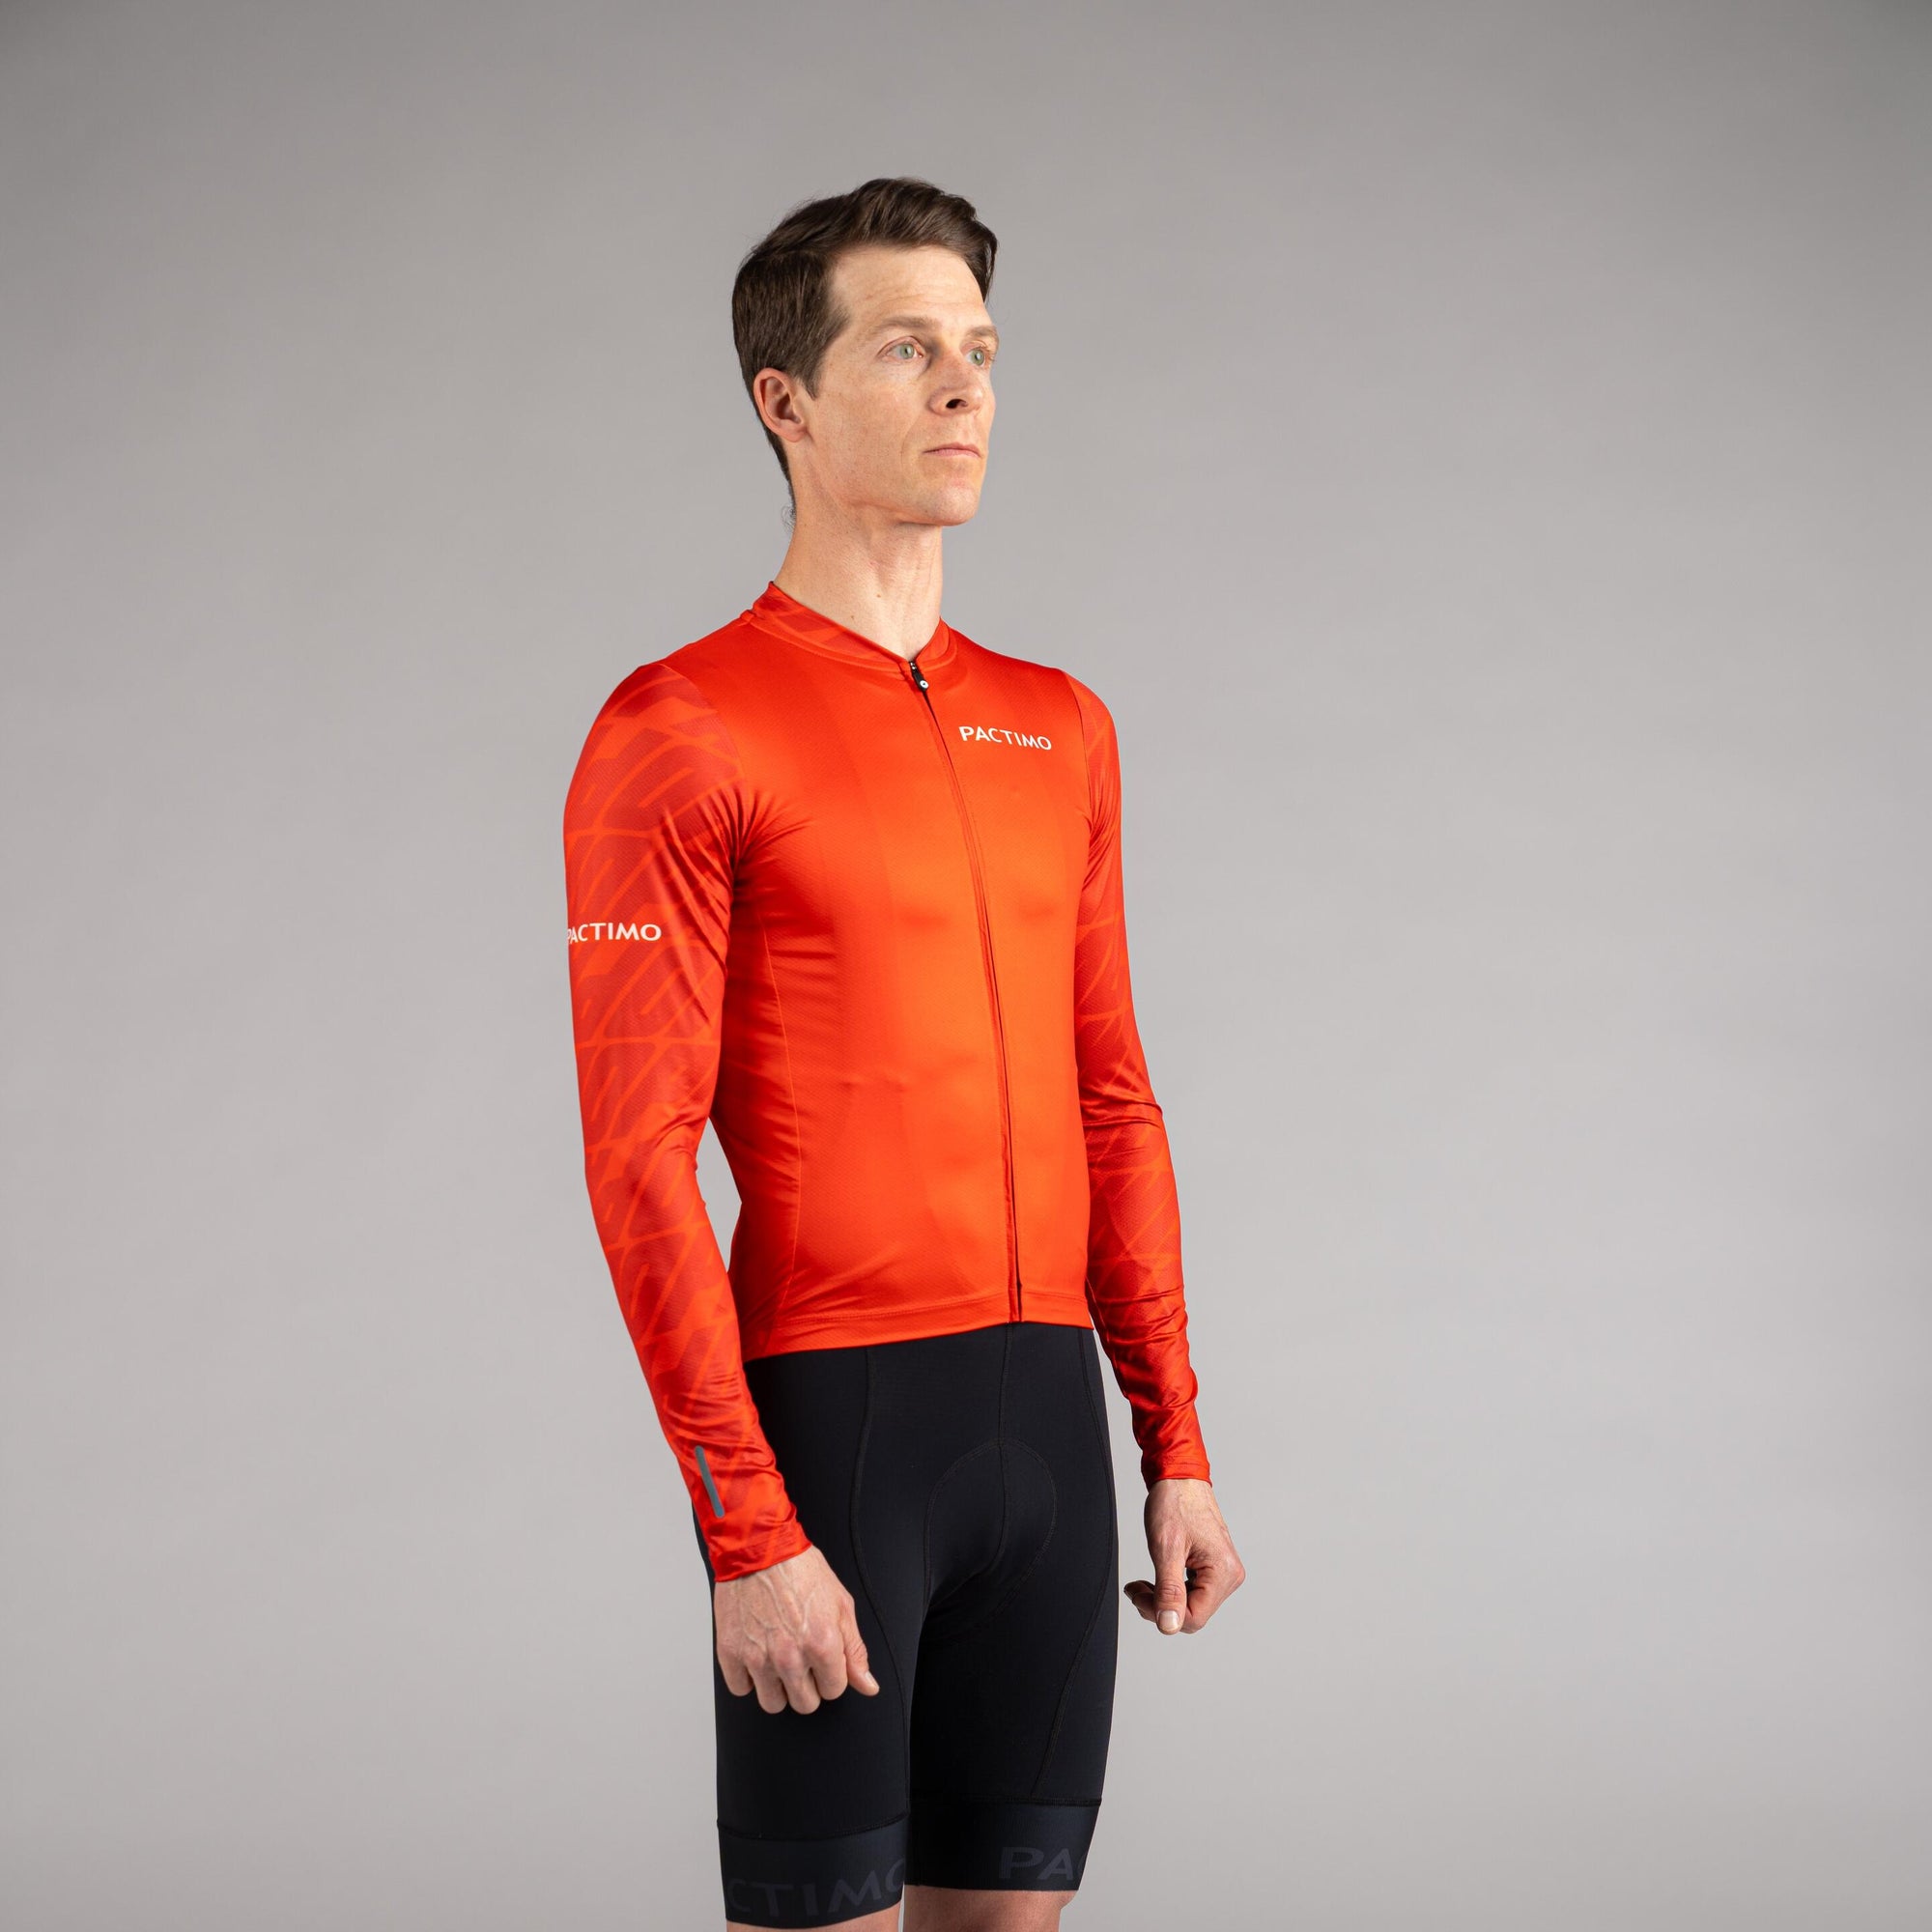 Men's Ascent Aero Long Sleeve Cycling Jersey - Fit Comparison